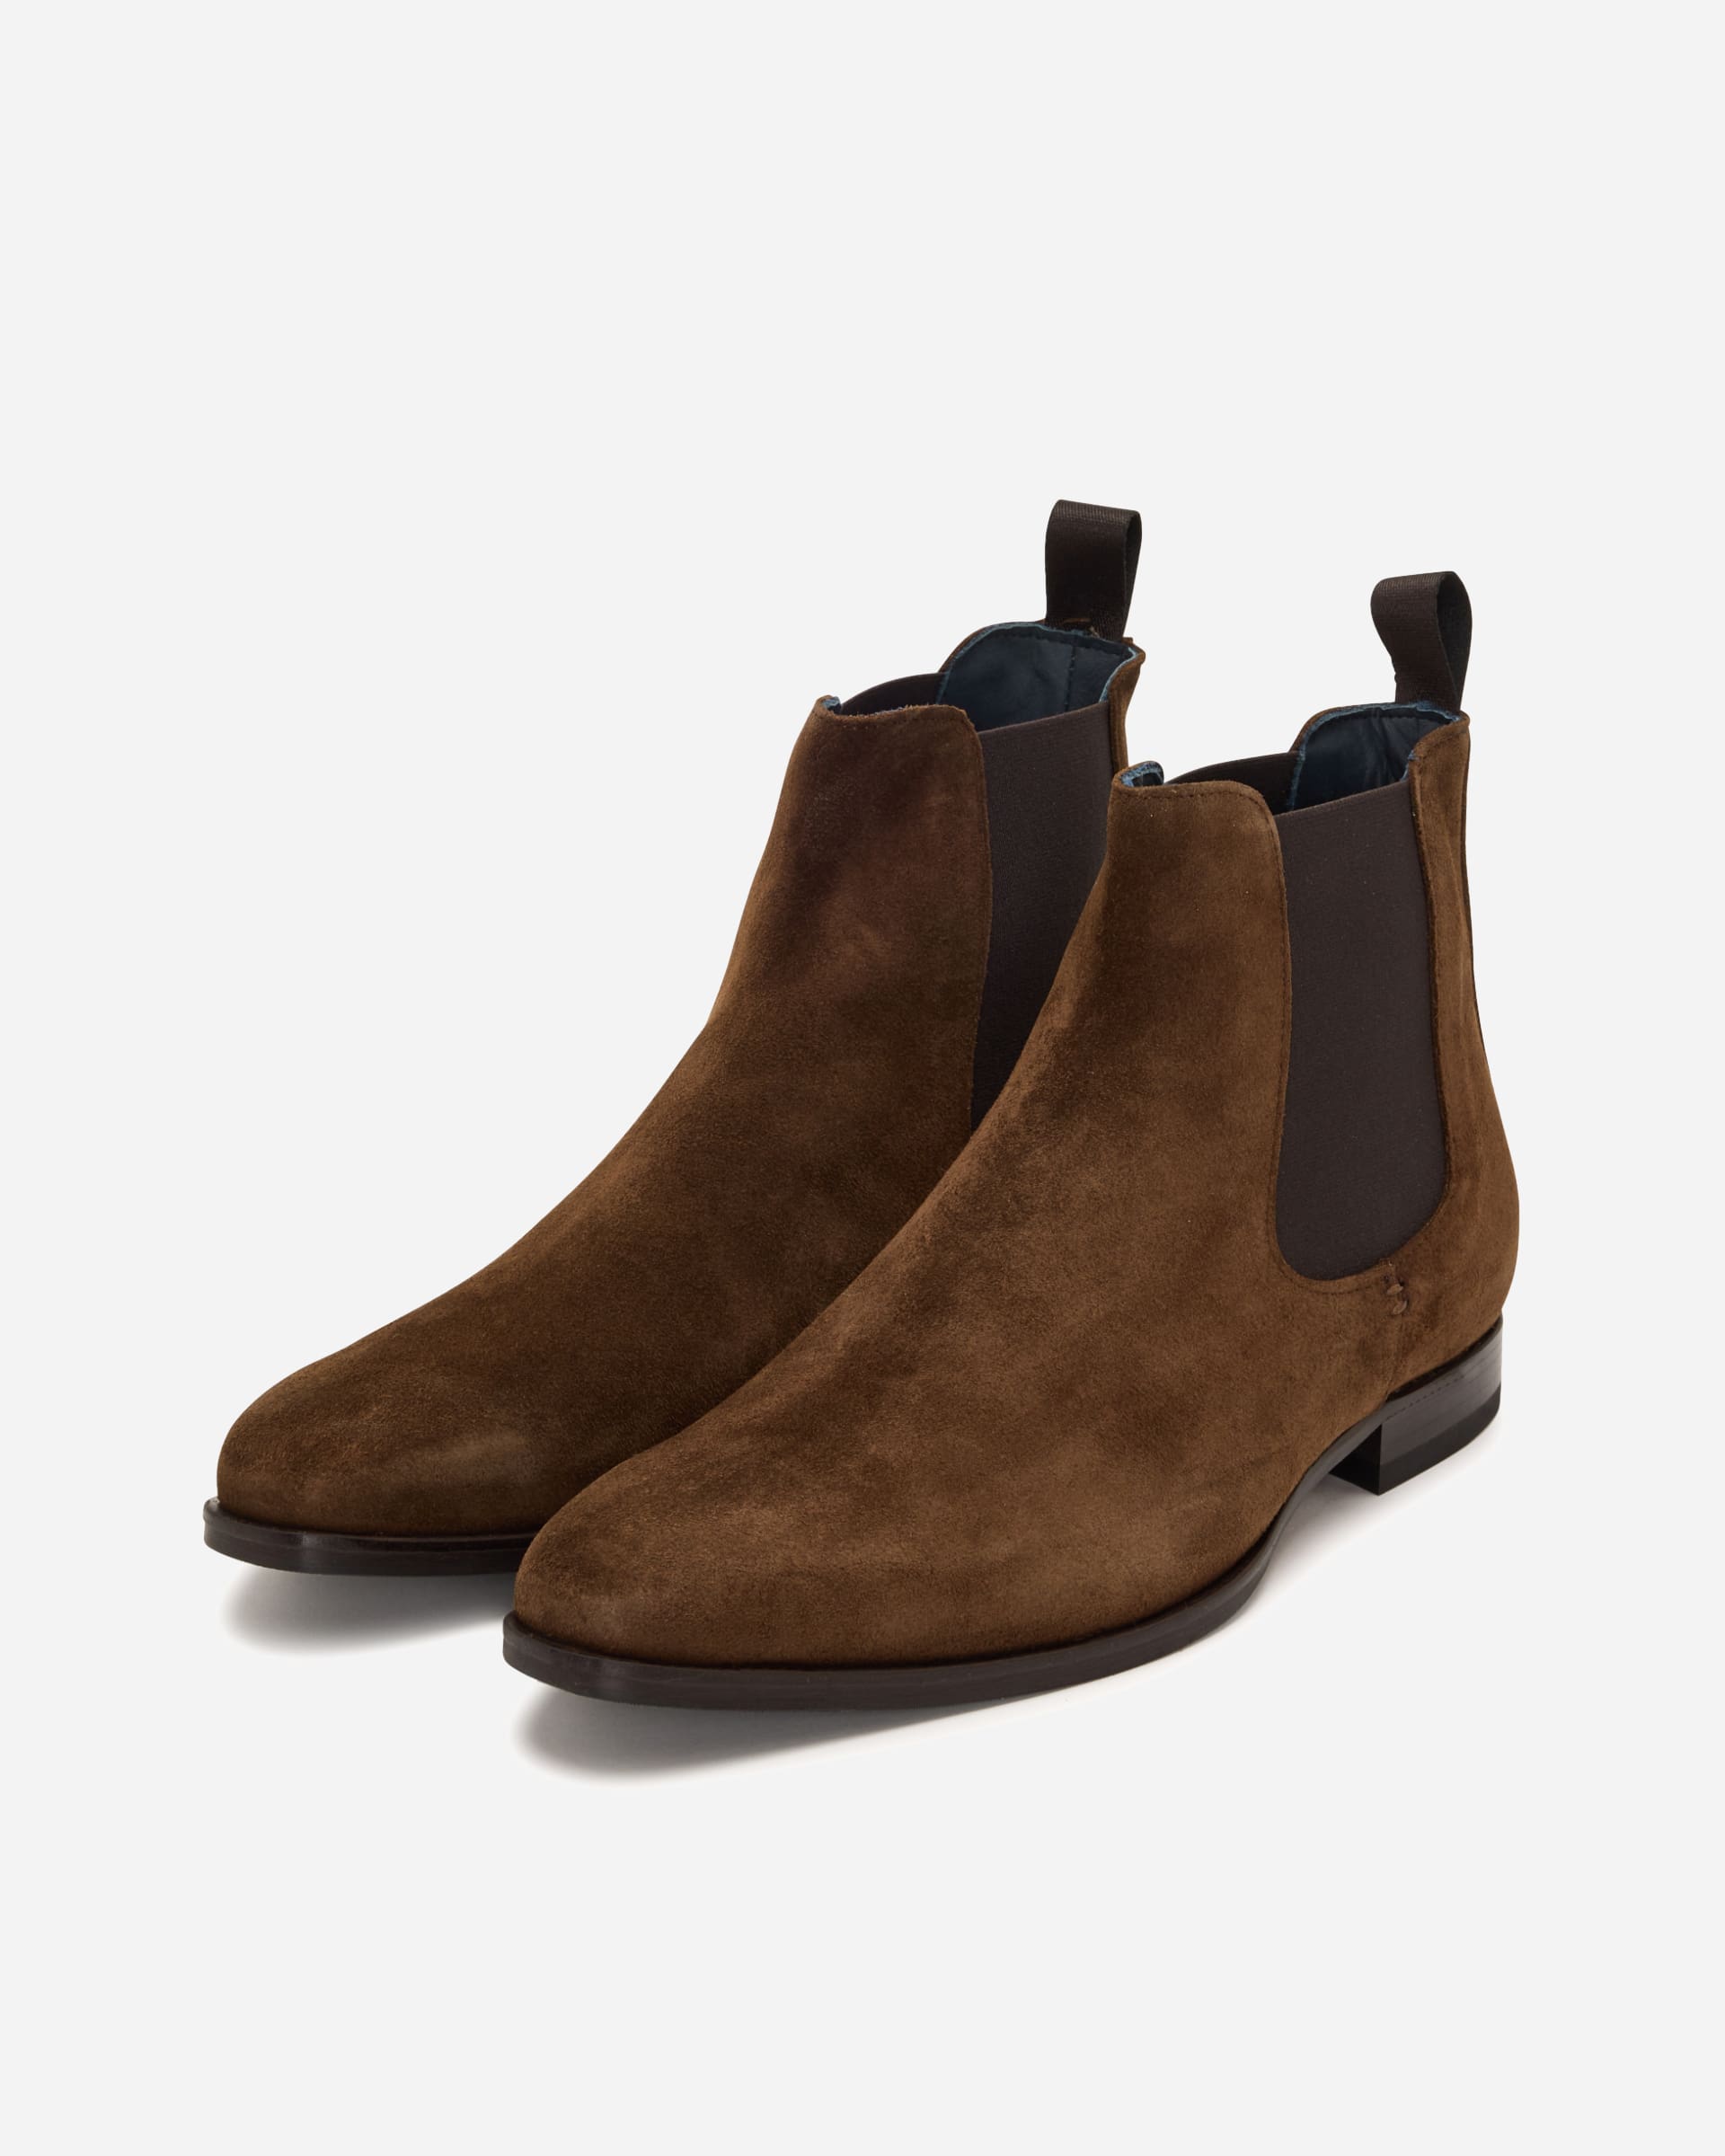 I Maschi Brown Suede Chelsea Boot - Men's Shoes at Menzclub